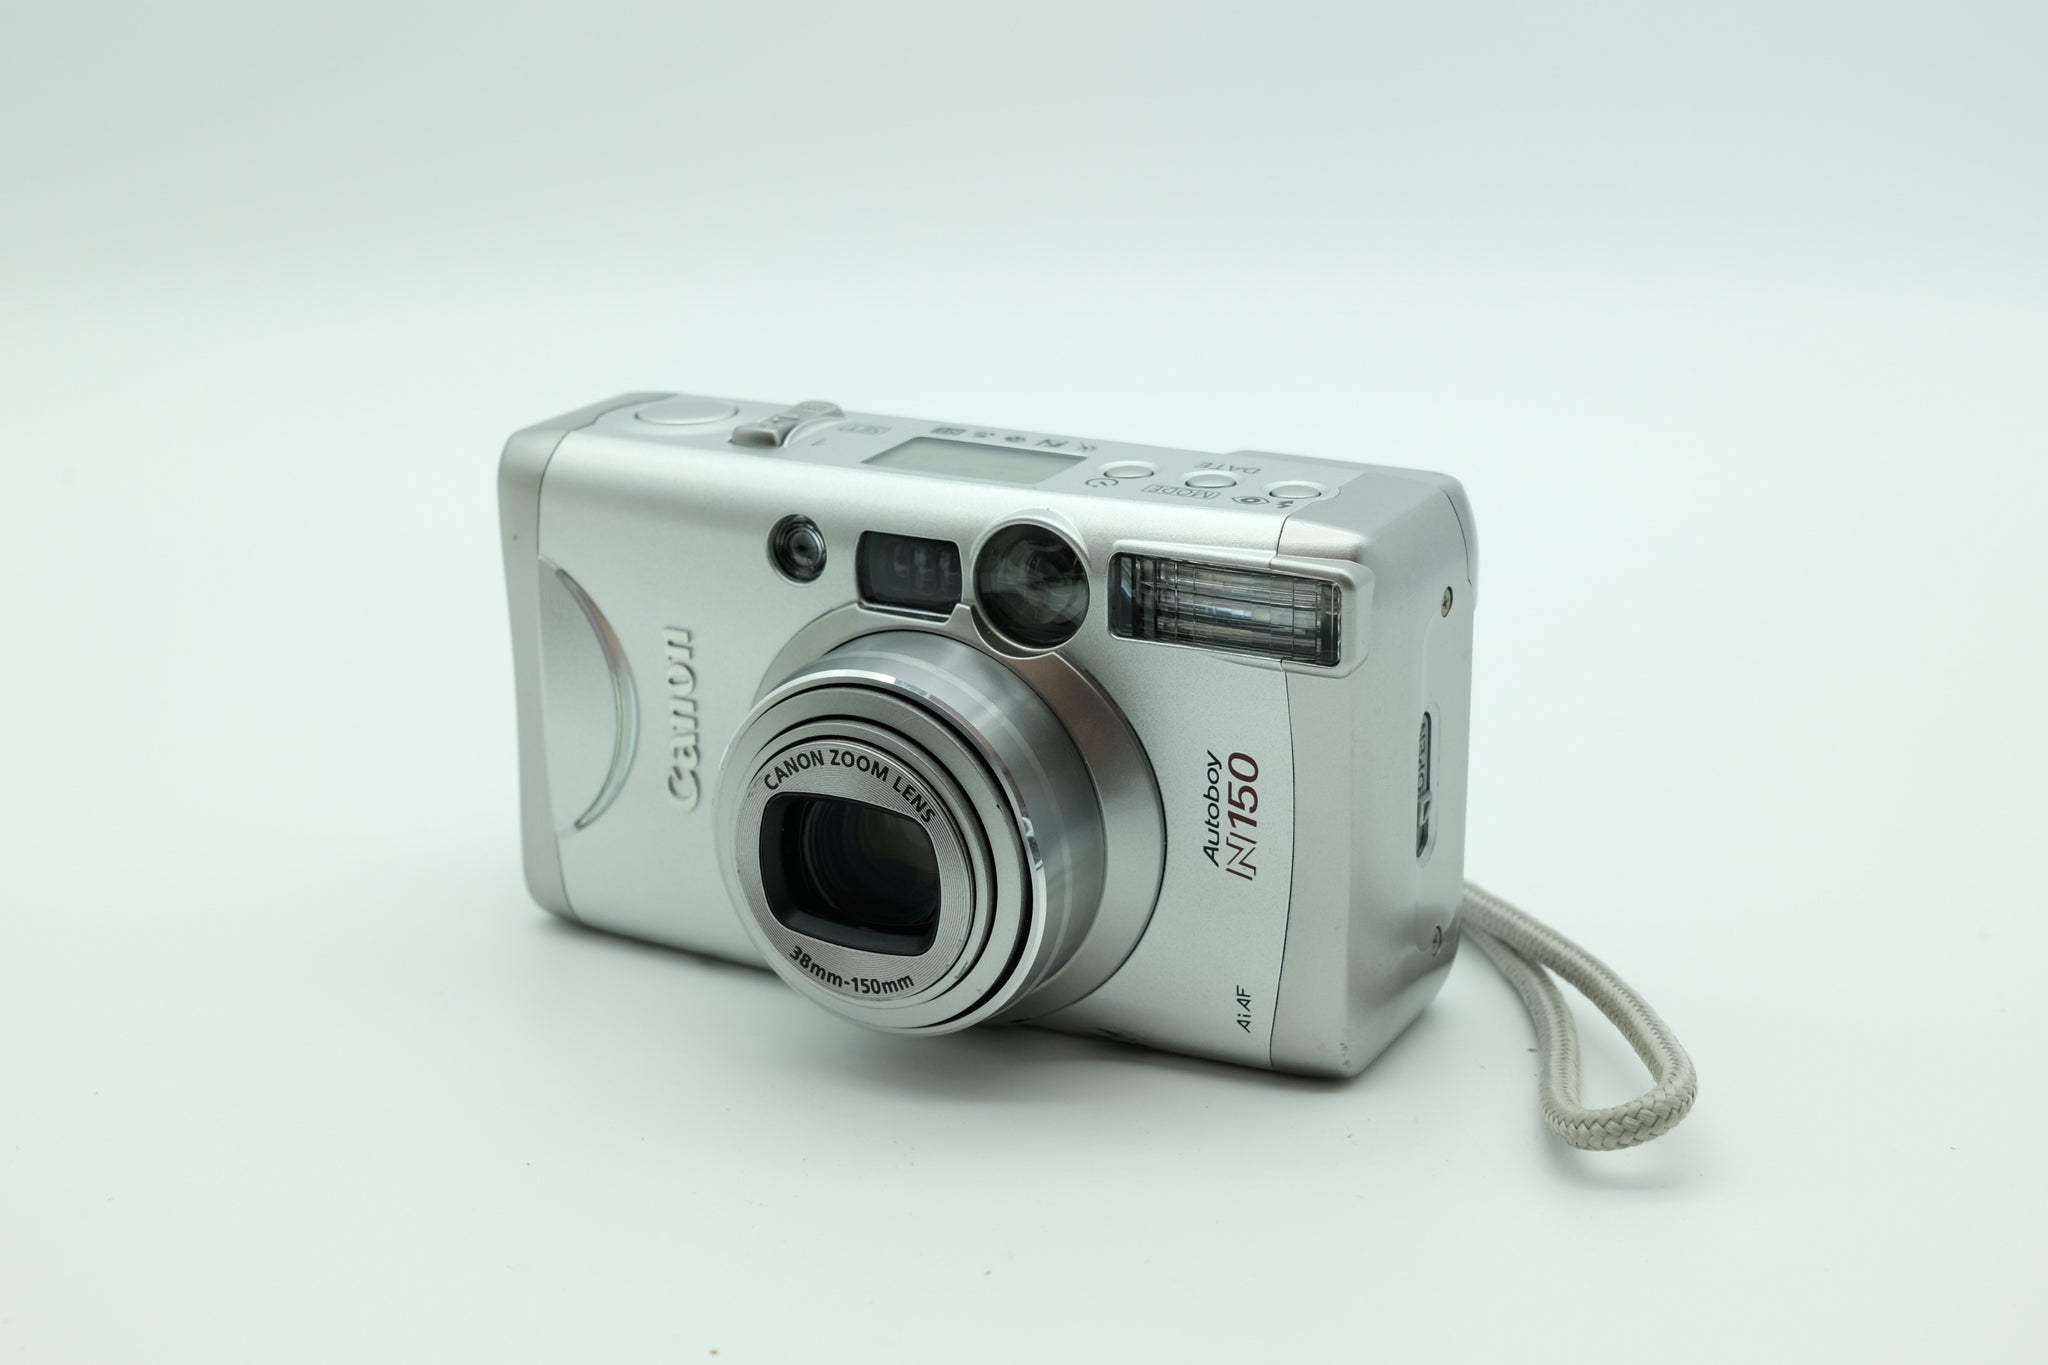 1st Camera Review on SCM - Canon Autoboy N150